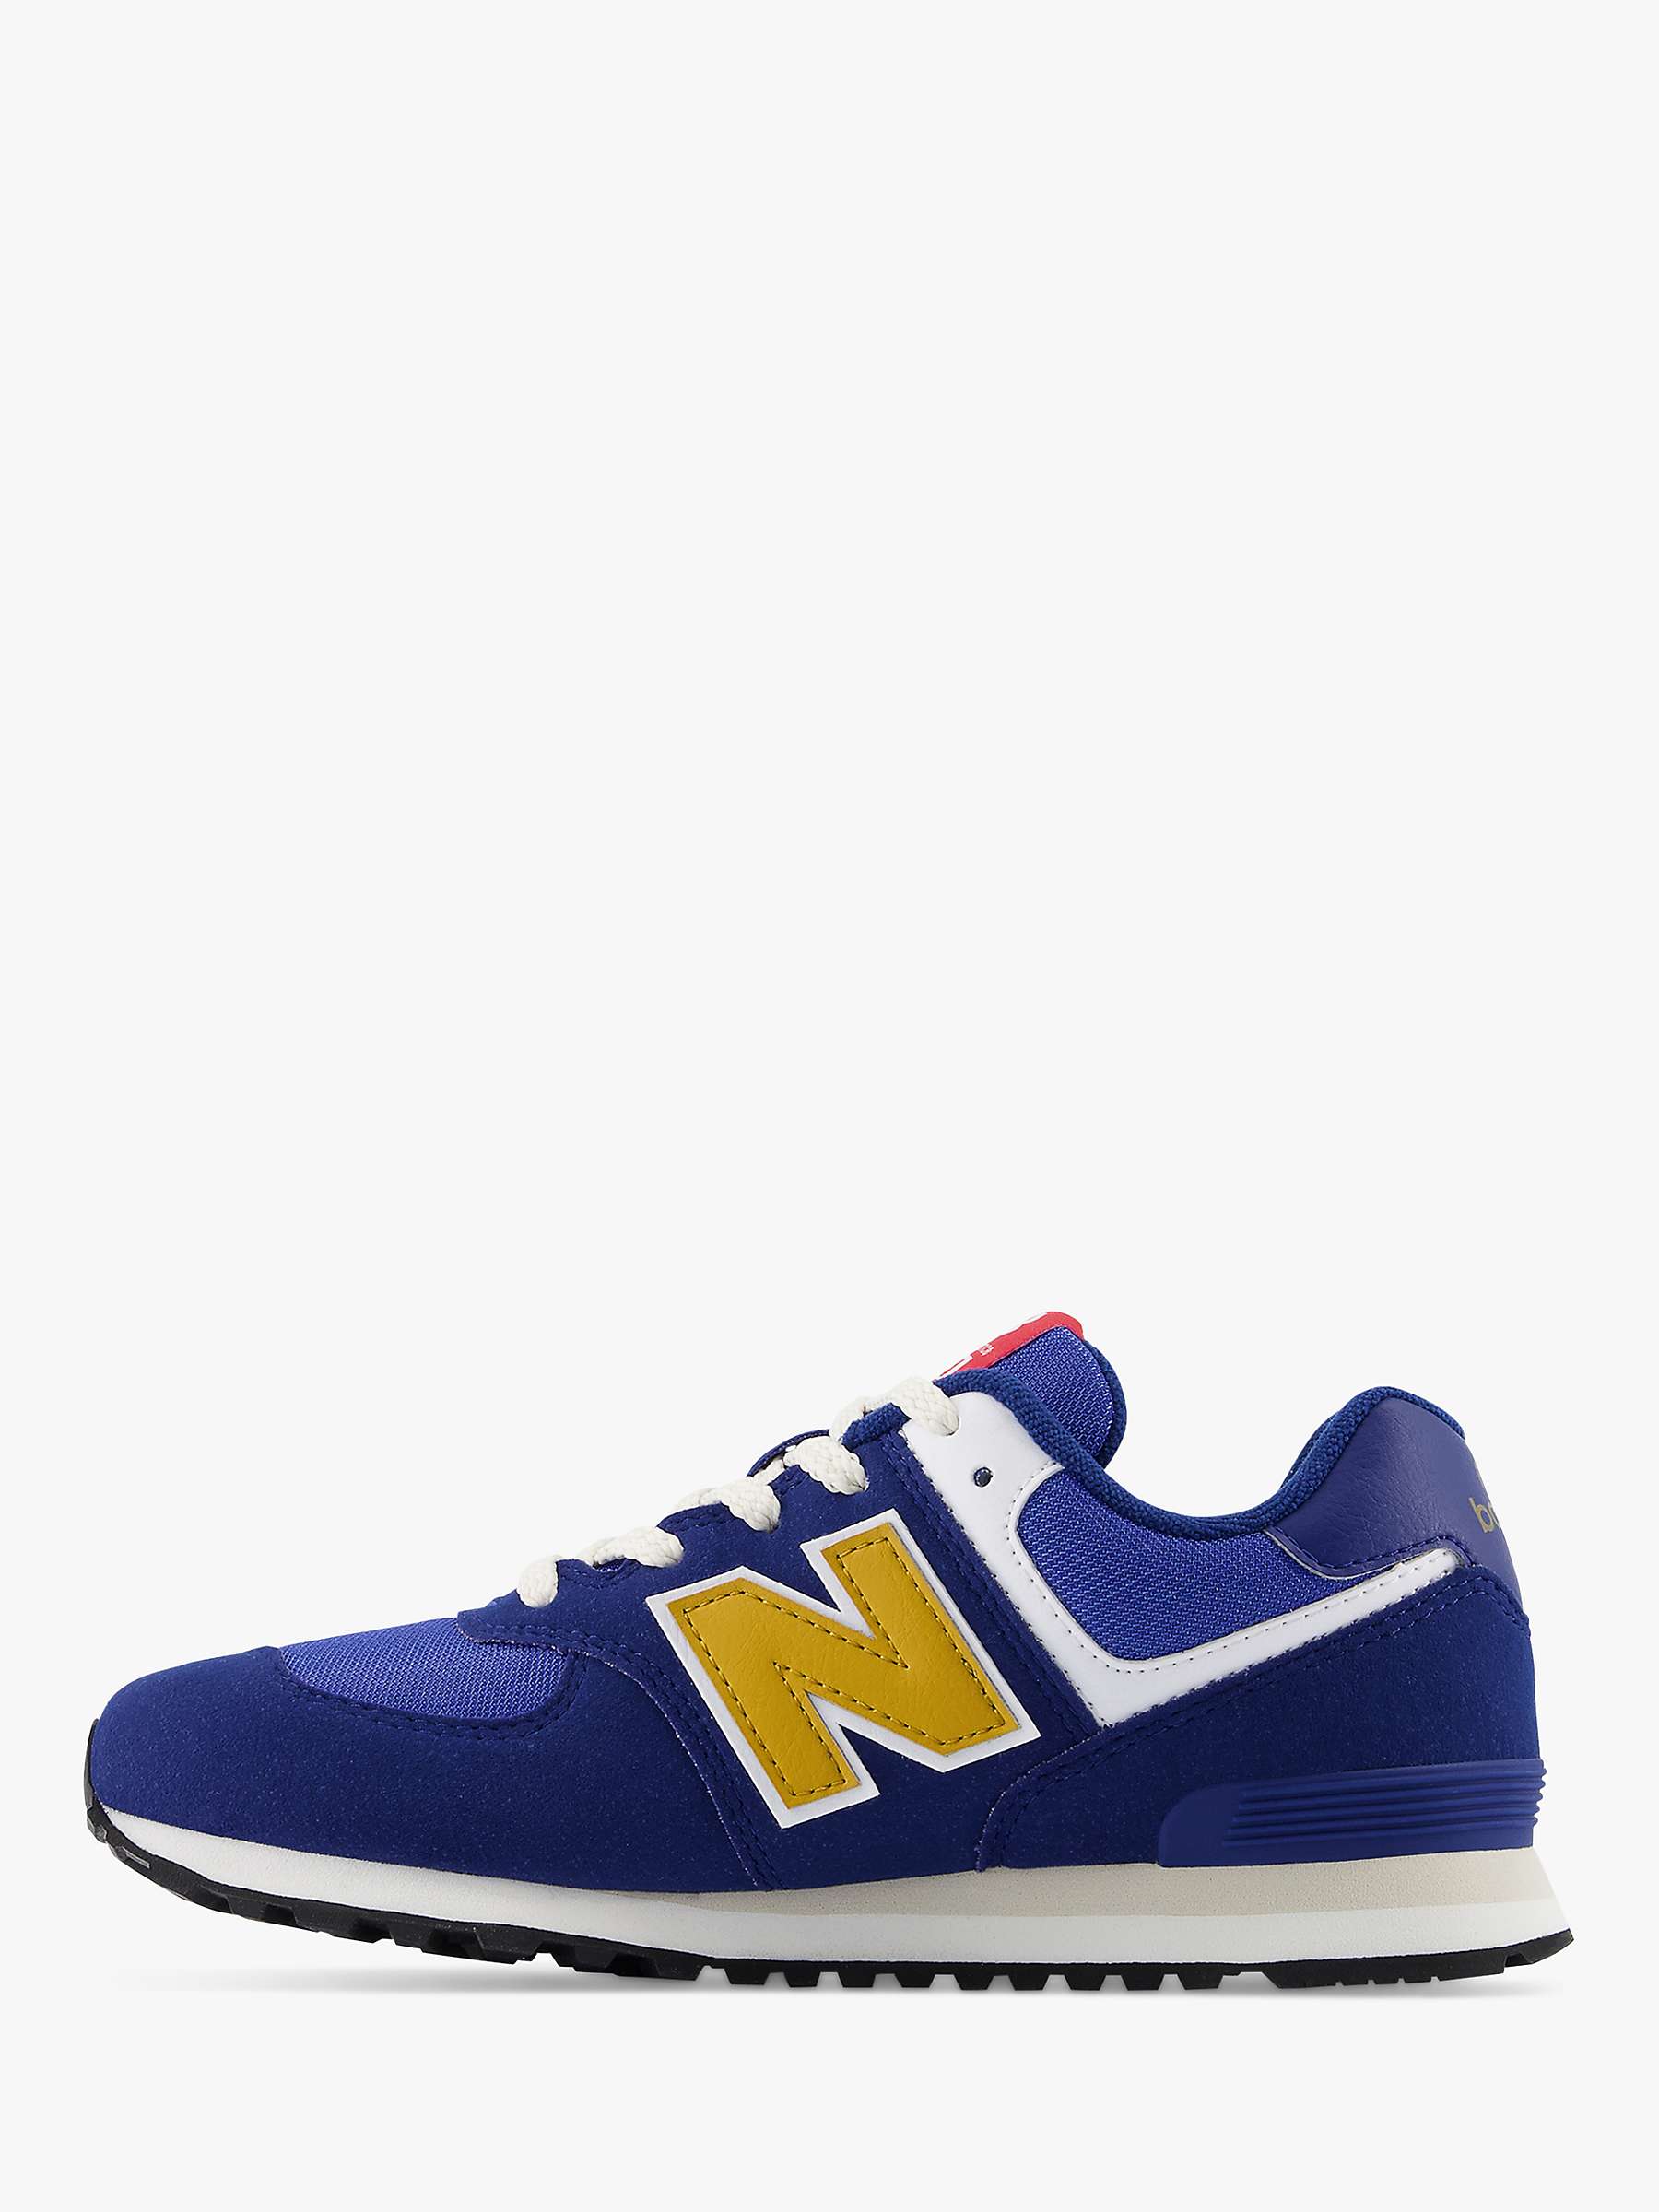 Buy New Balance Kids' 574 Lace-Up Trainers, Blue/Multi Online at johnlewis.com